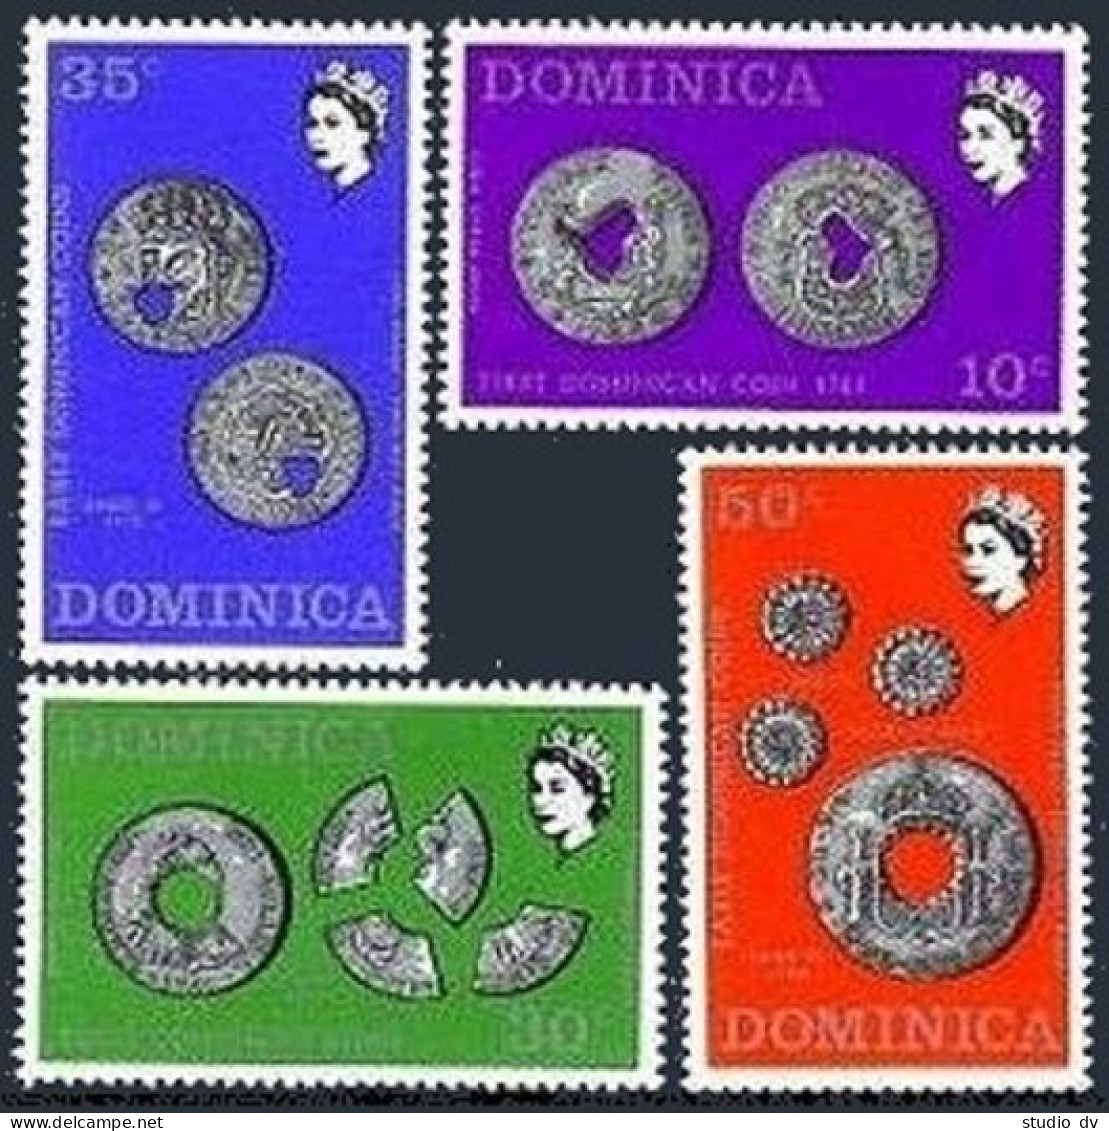 Dominica 333-336, 336a, MNH. Michel 333-336, Bl.12. Christmas 1971, Early Coins. - Dominica (1978-...)